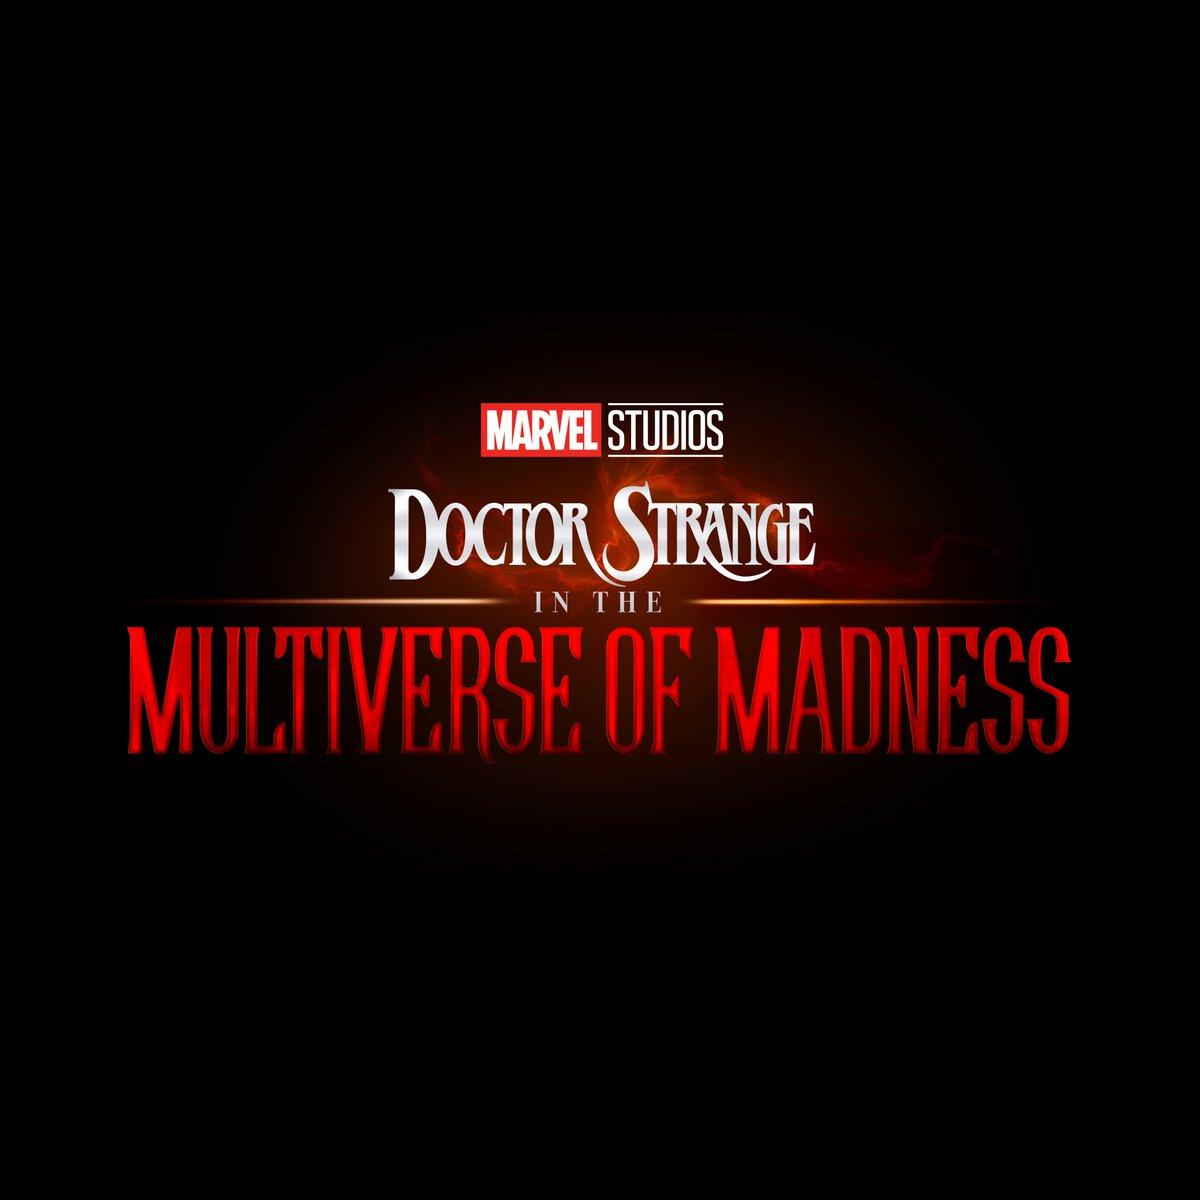 Marvel Studios announced in Hall H at #SDCC